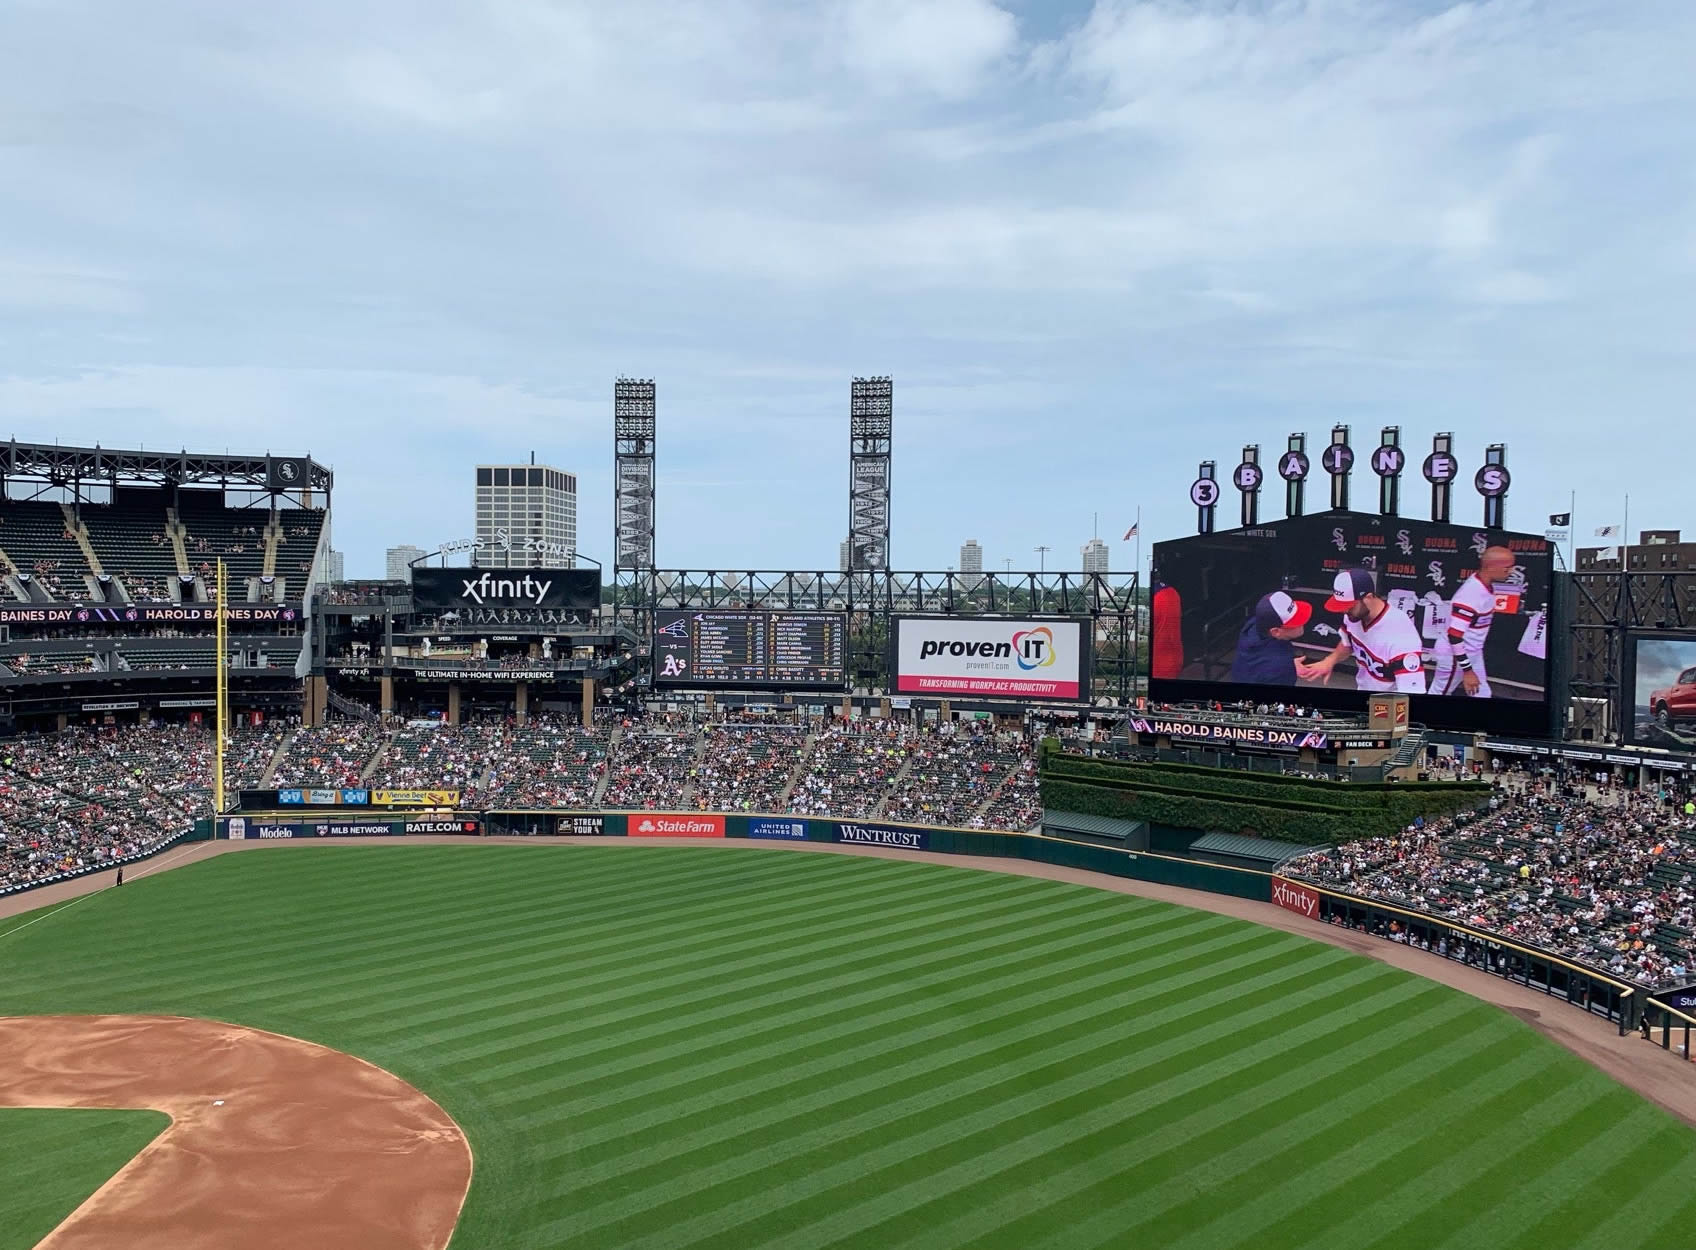 The 300s Reviews: Guaranteed Rate Field, Home of the Chicago White